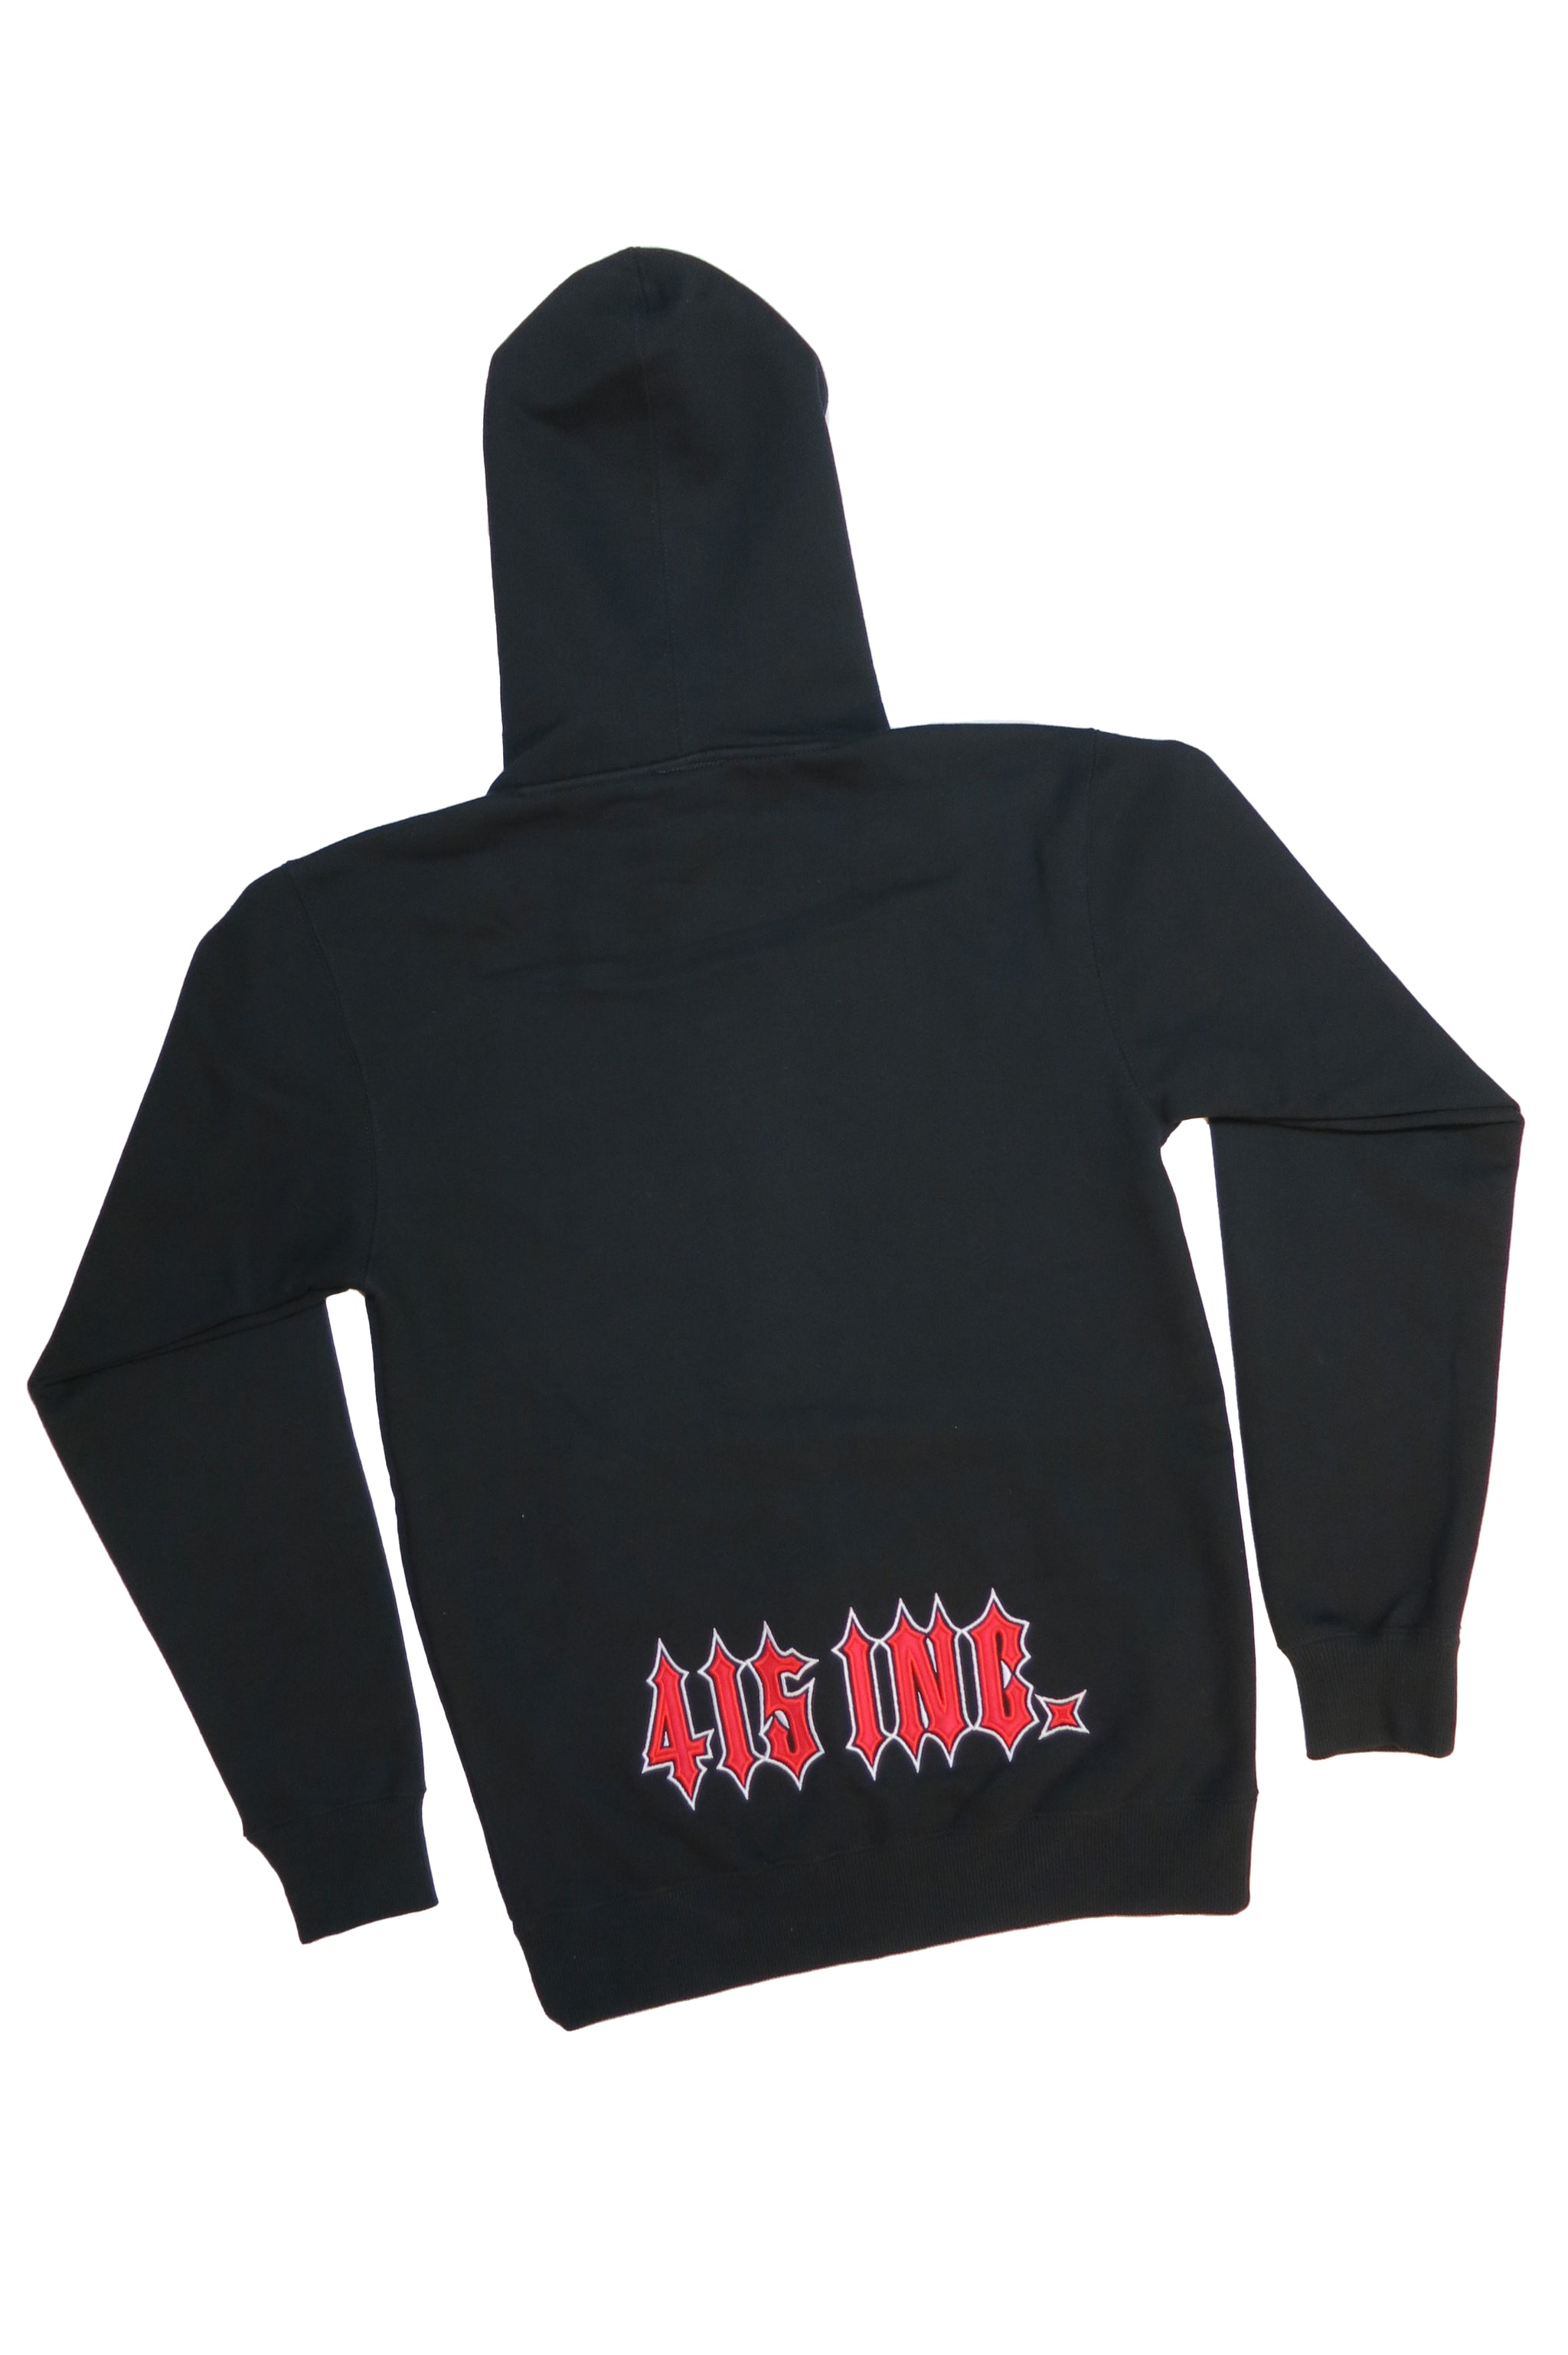 Spikey Sweatshirt 415 - Frisco Embroidered Hooded Clothing, Zipper